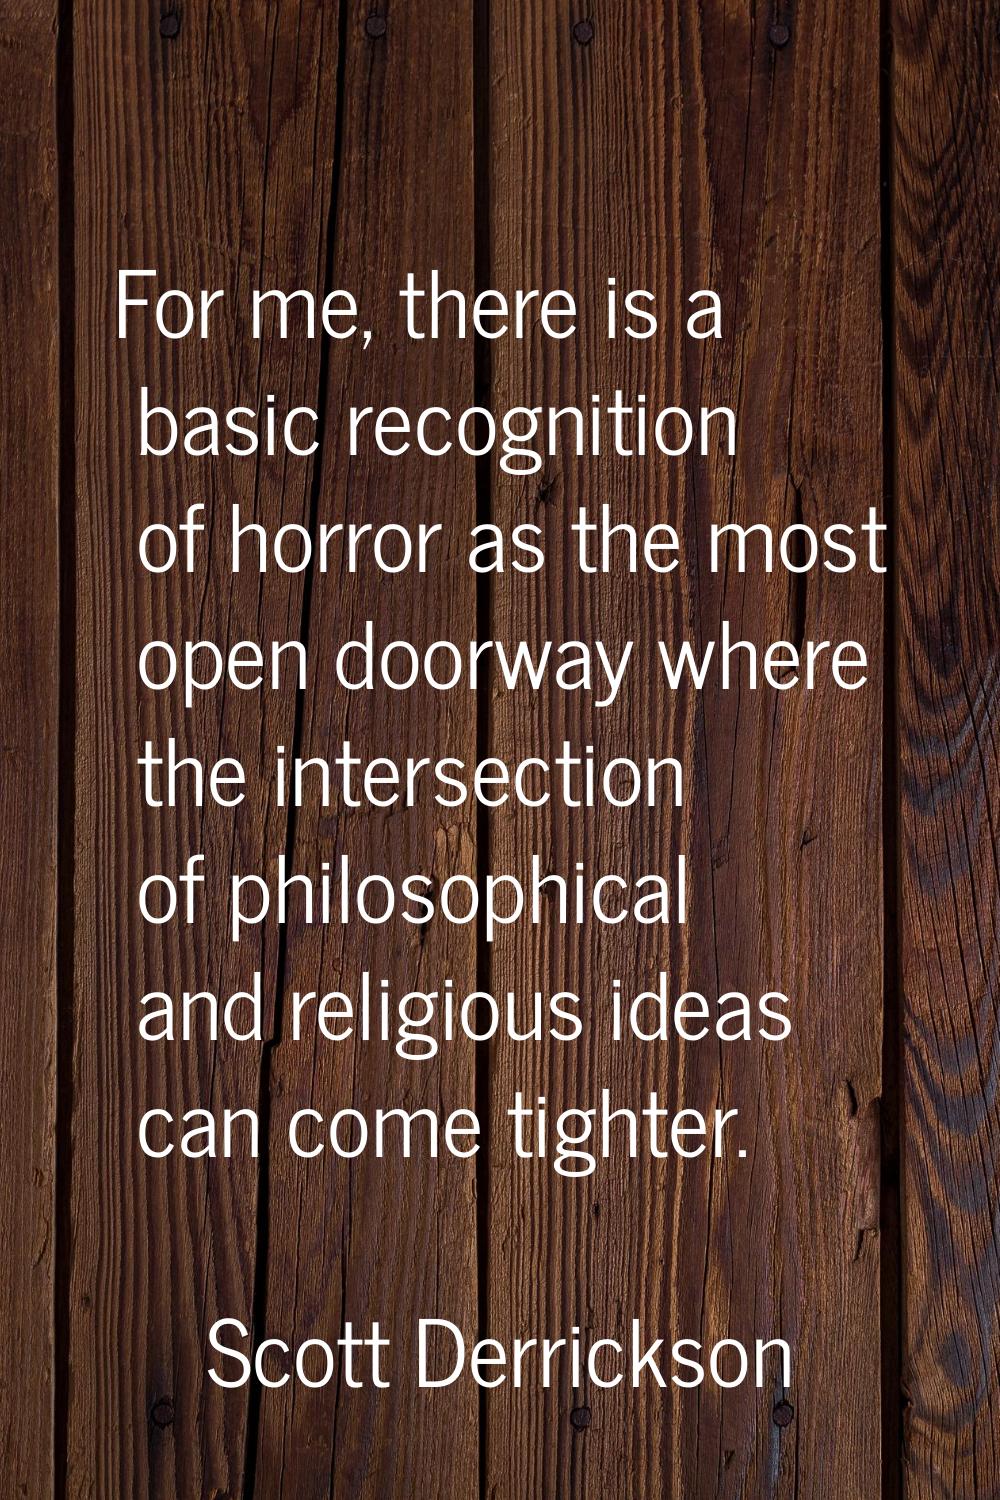 For me, there is a basic recognition of horror as the most open doorway where the intersection of p